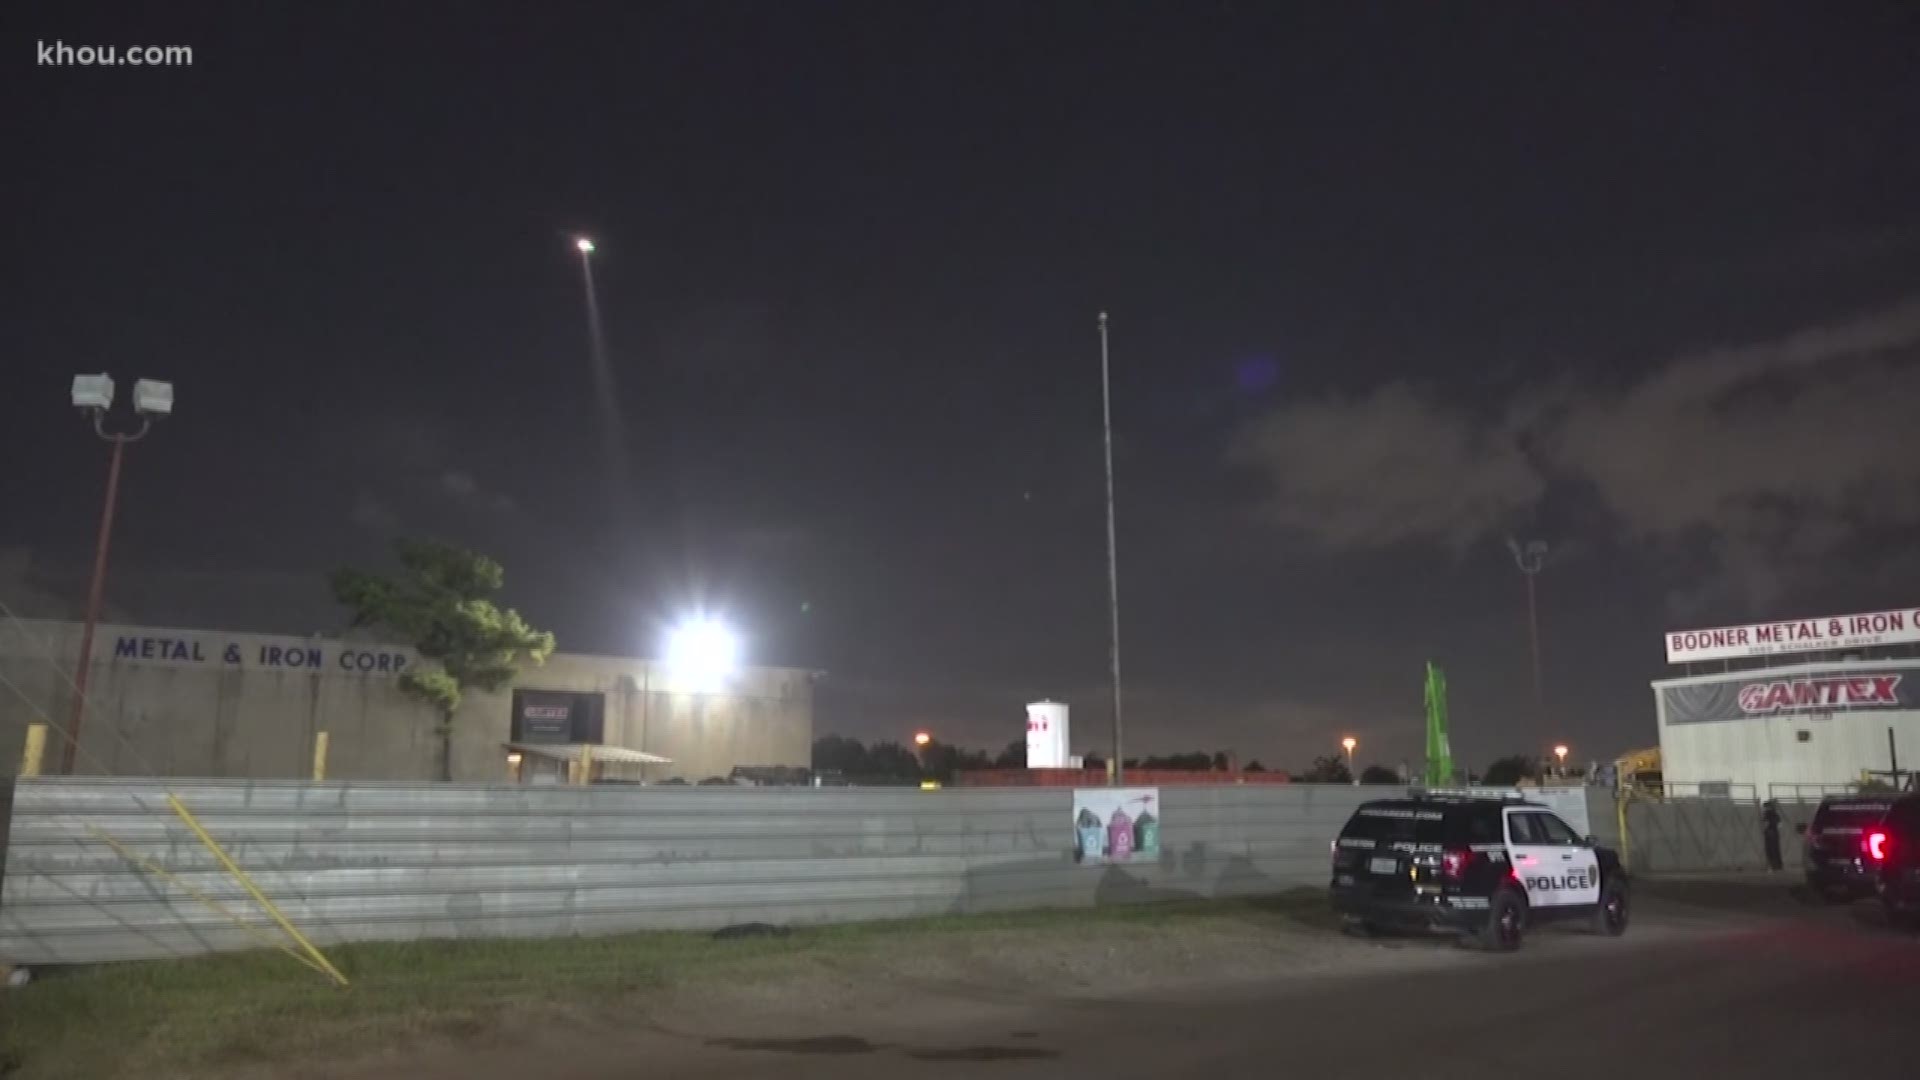 A burglary call led to the discovery of a body in a north Houston warehouse, police said early Thursday.